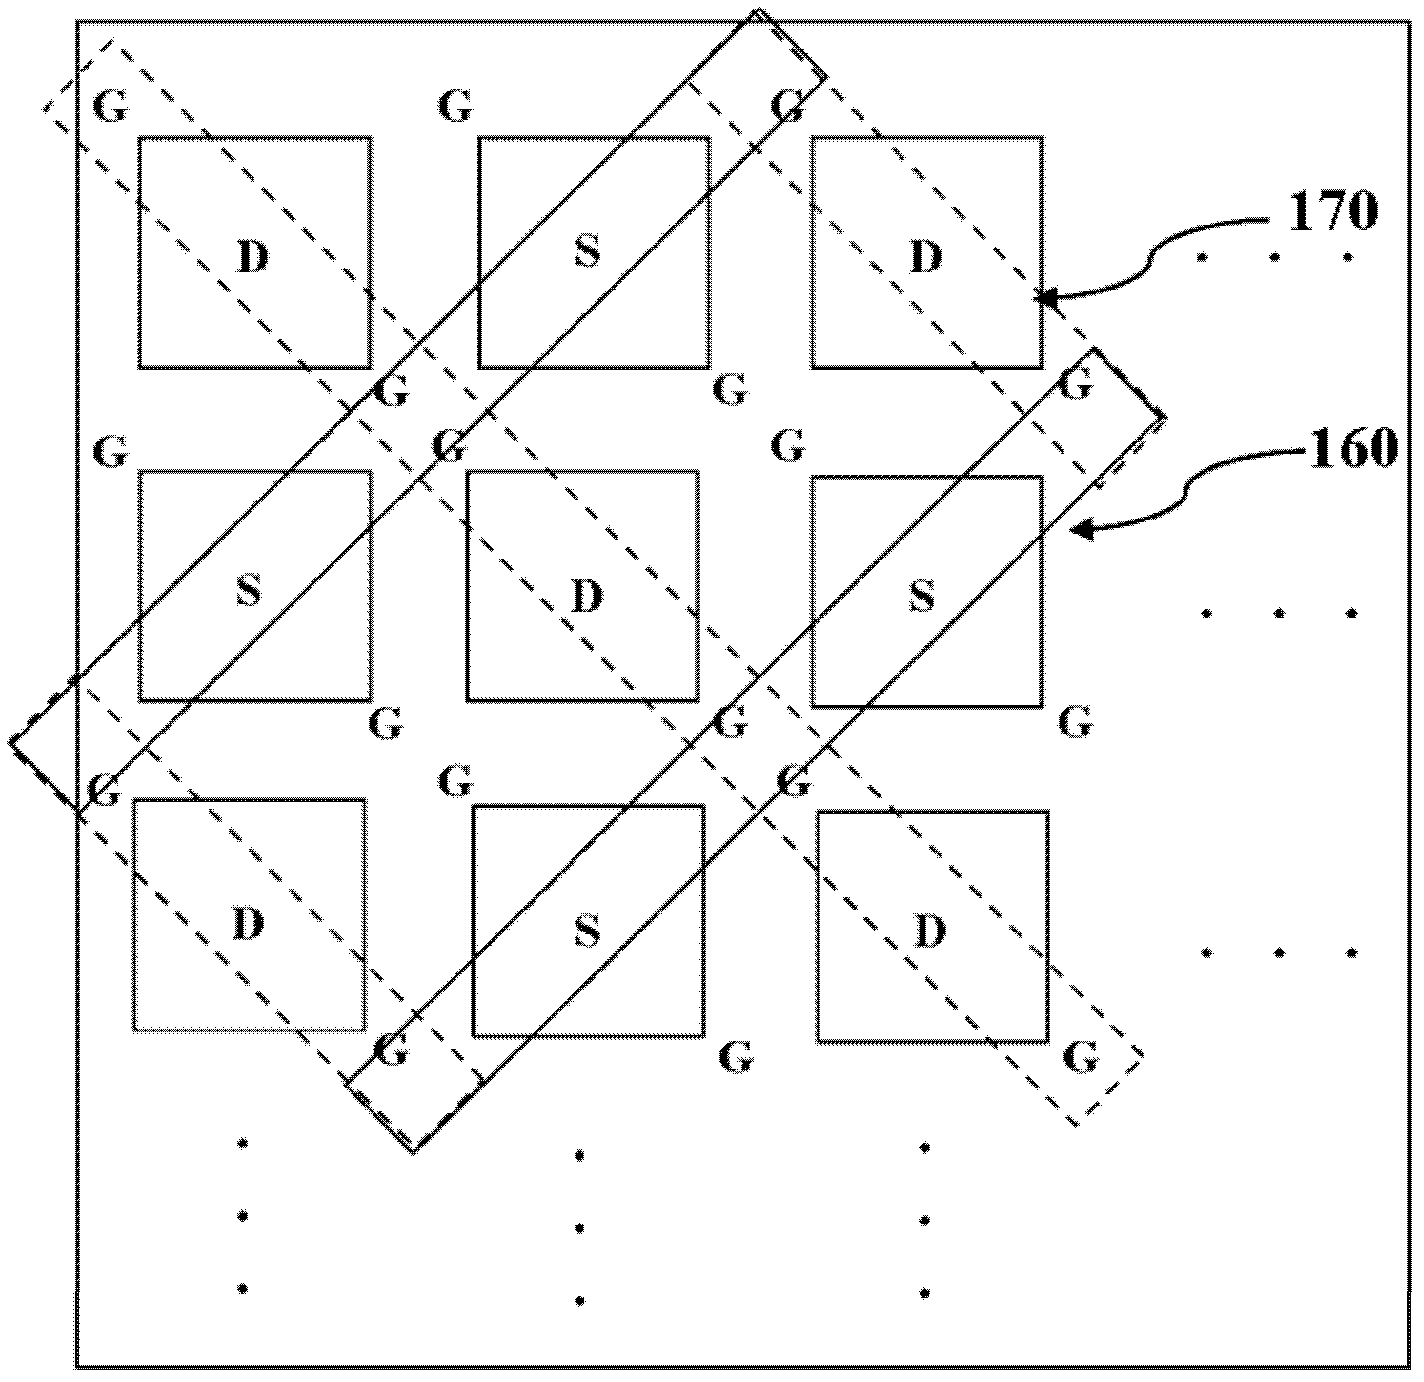 Metal-oxide-semiconductor field-effect transistor layout structure